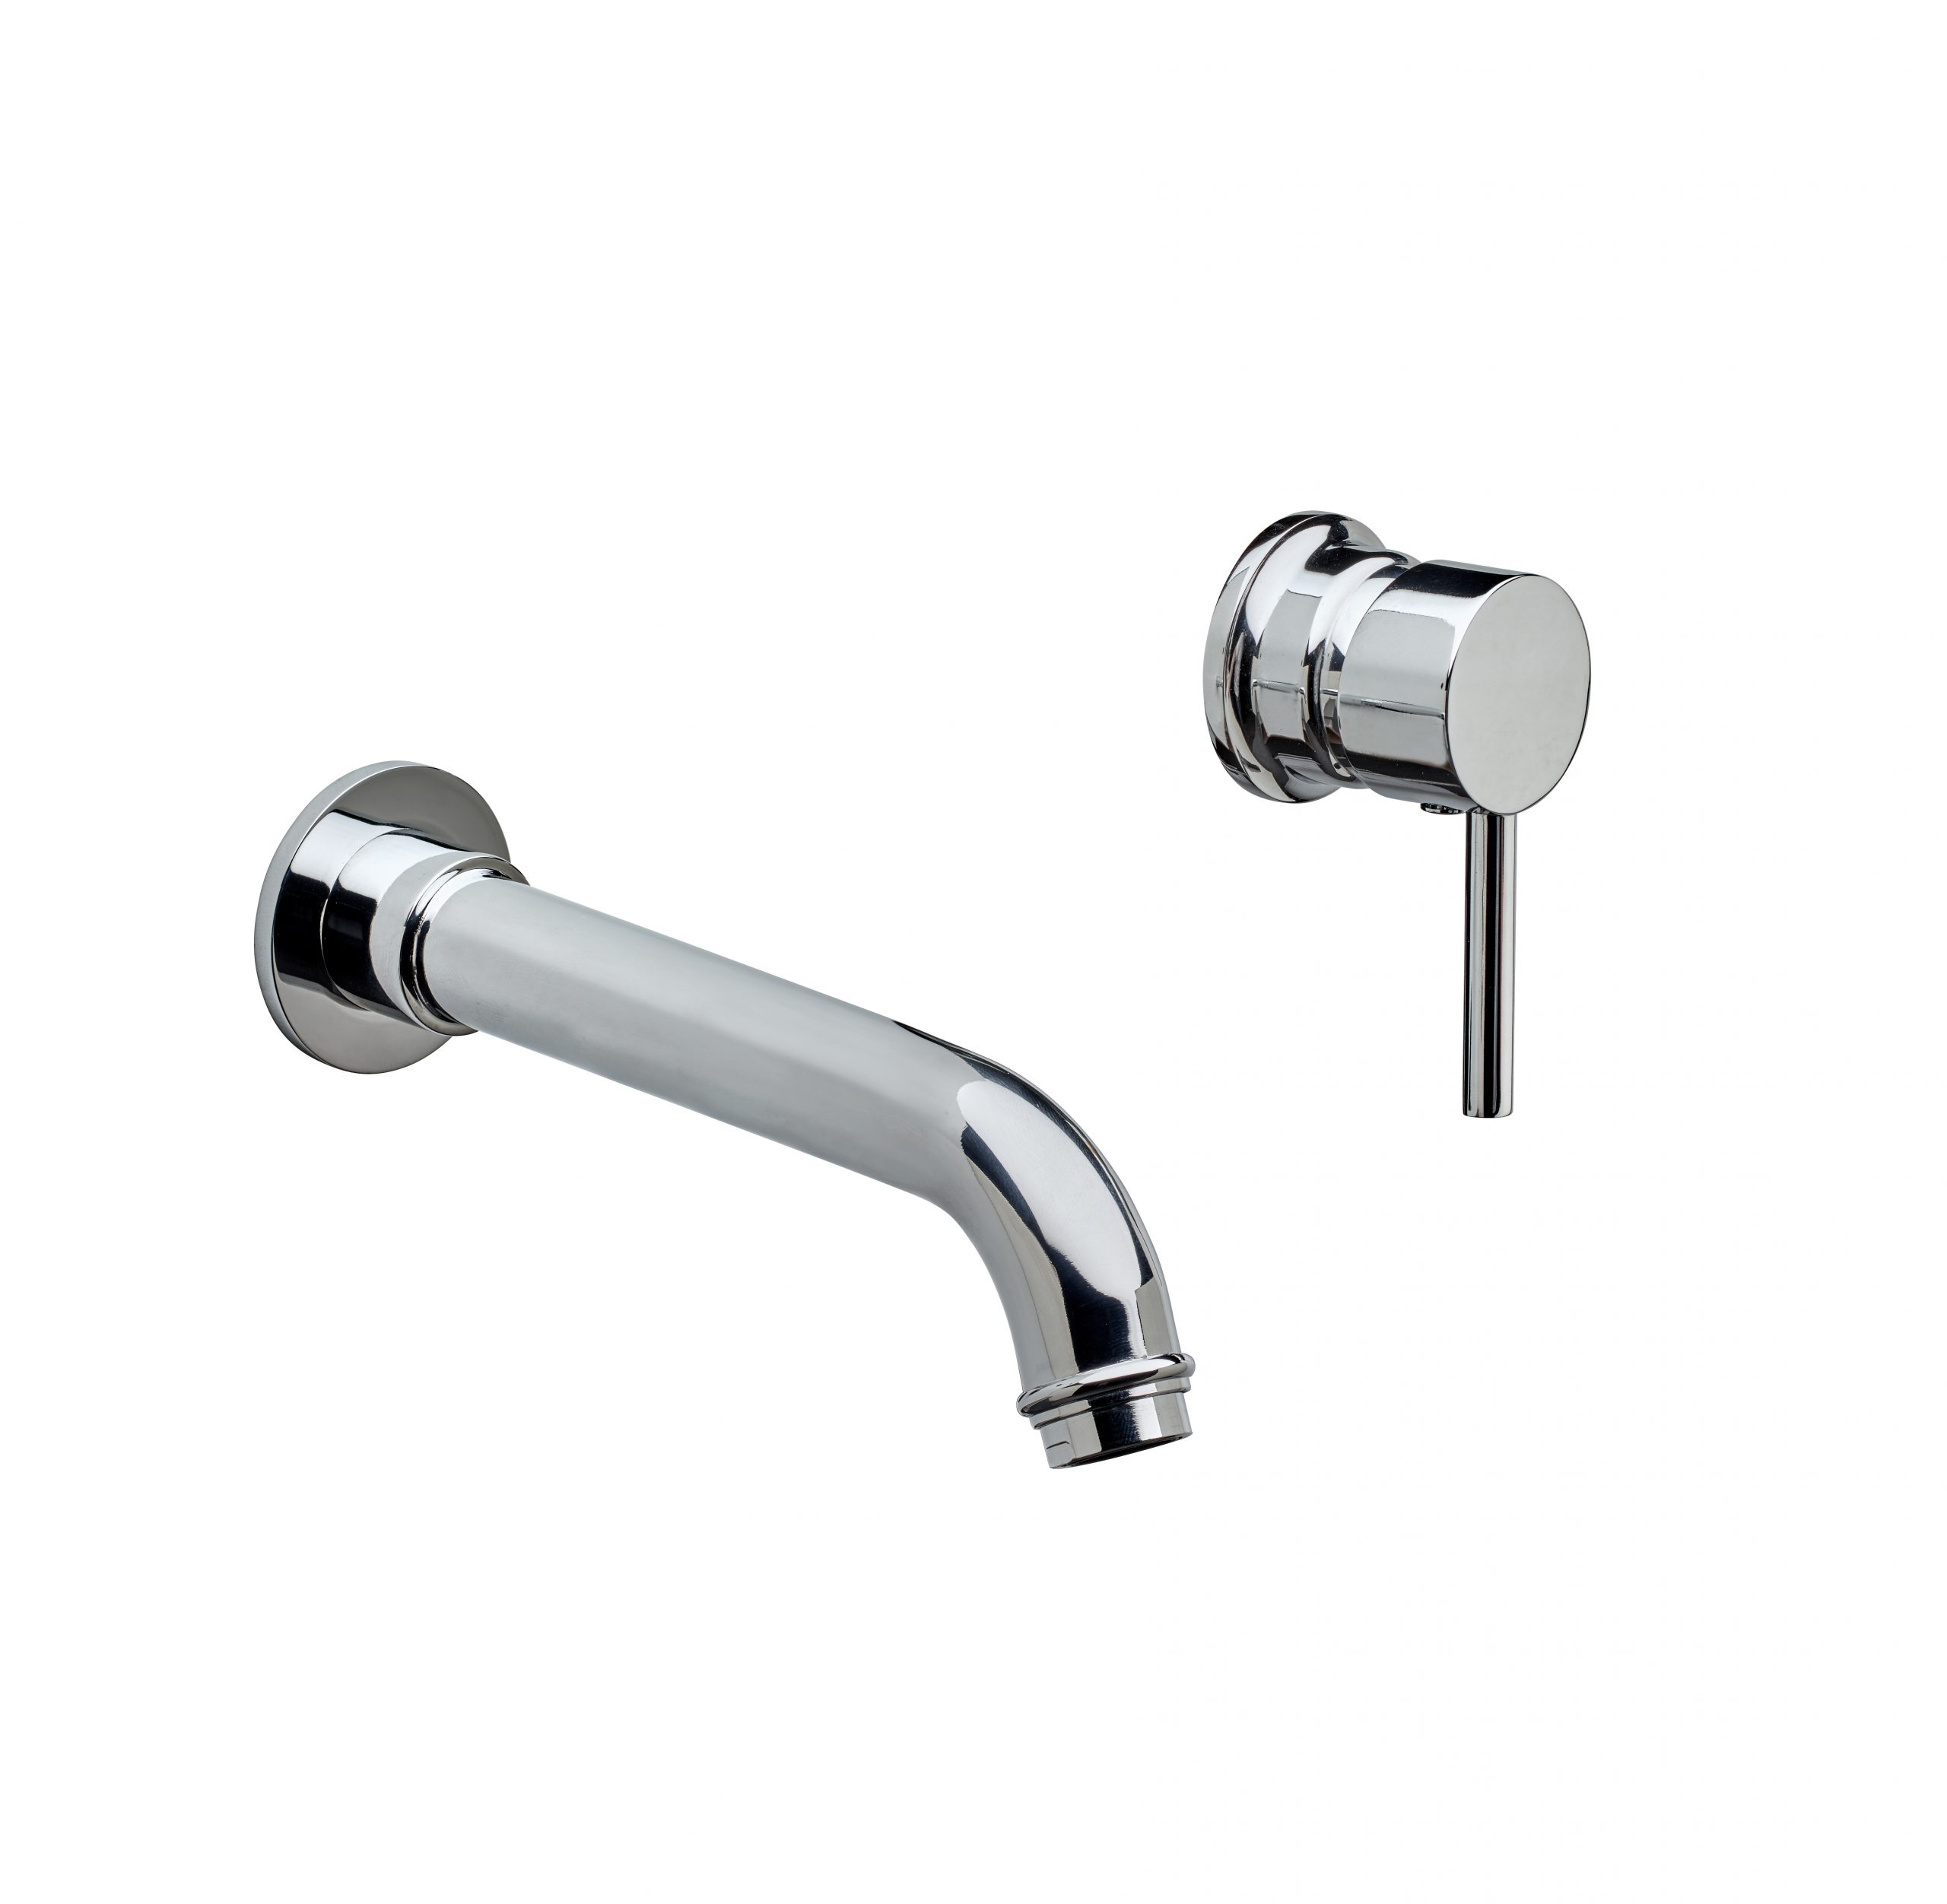 Built-in washbasin mixer with wall spout, without waste